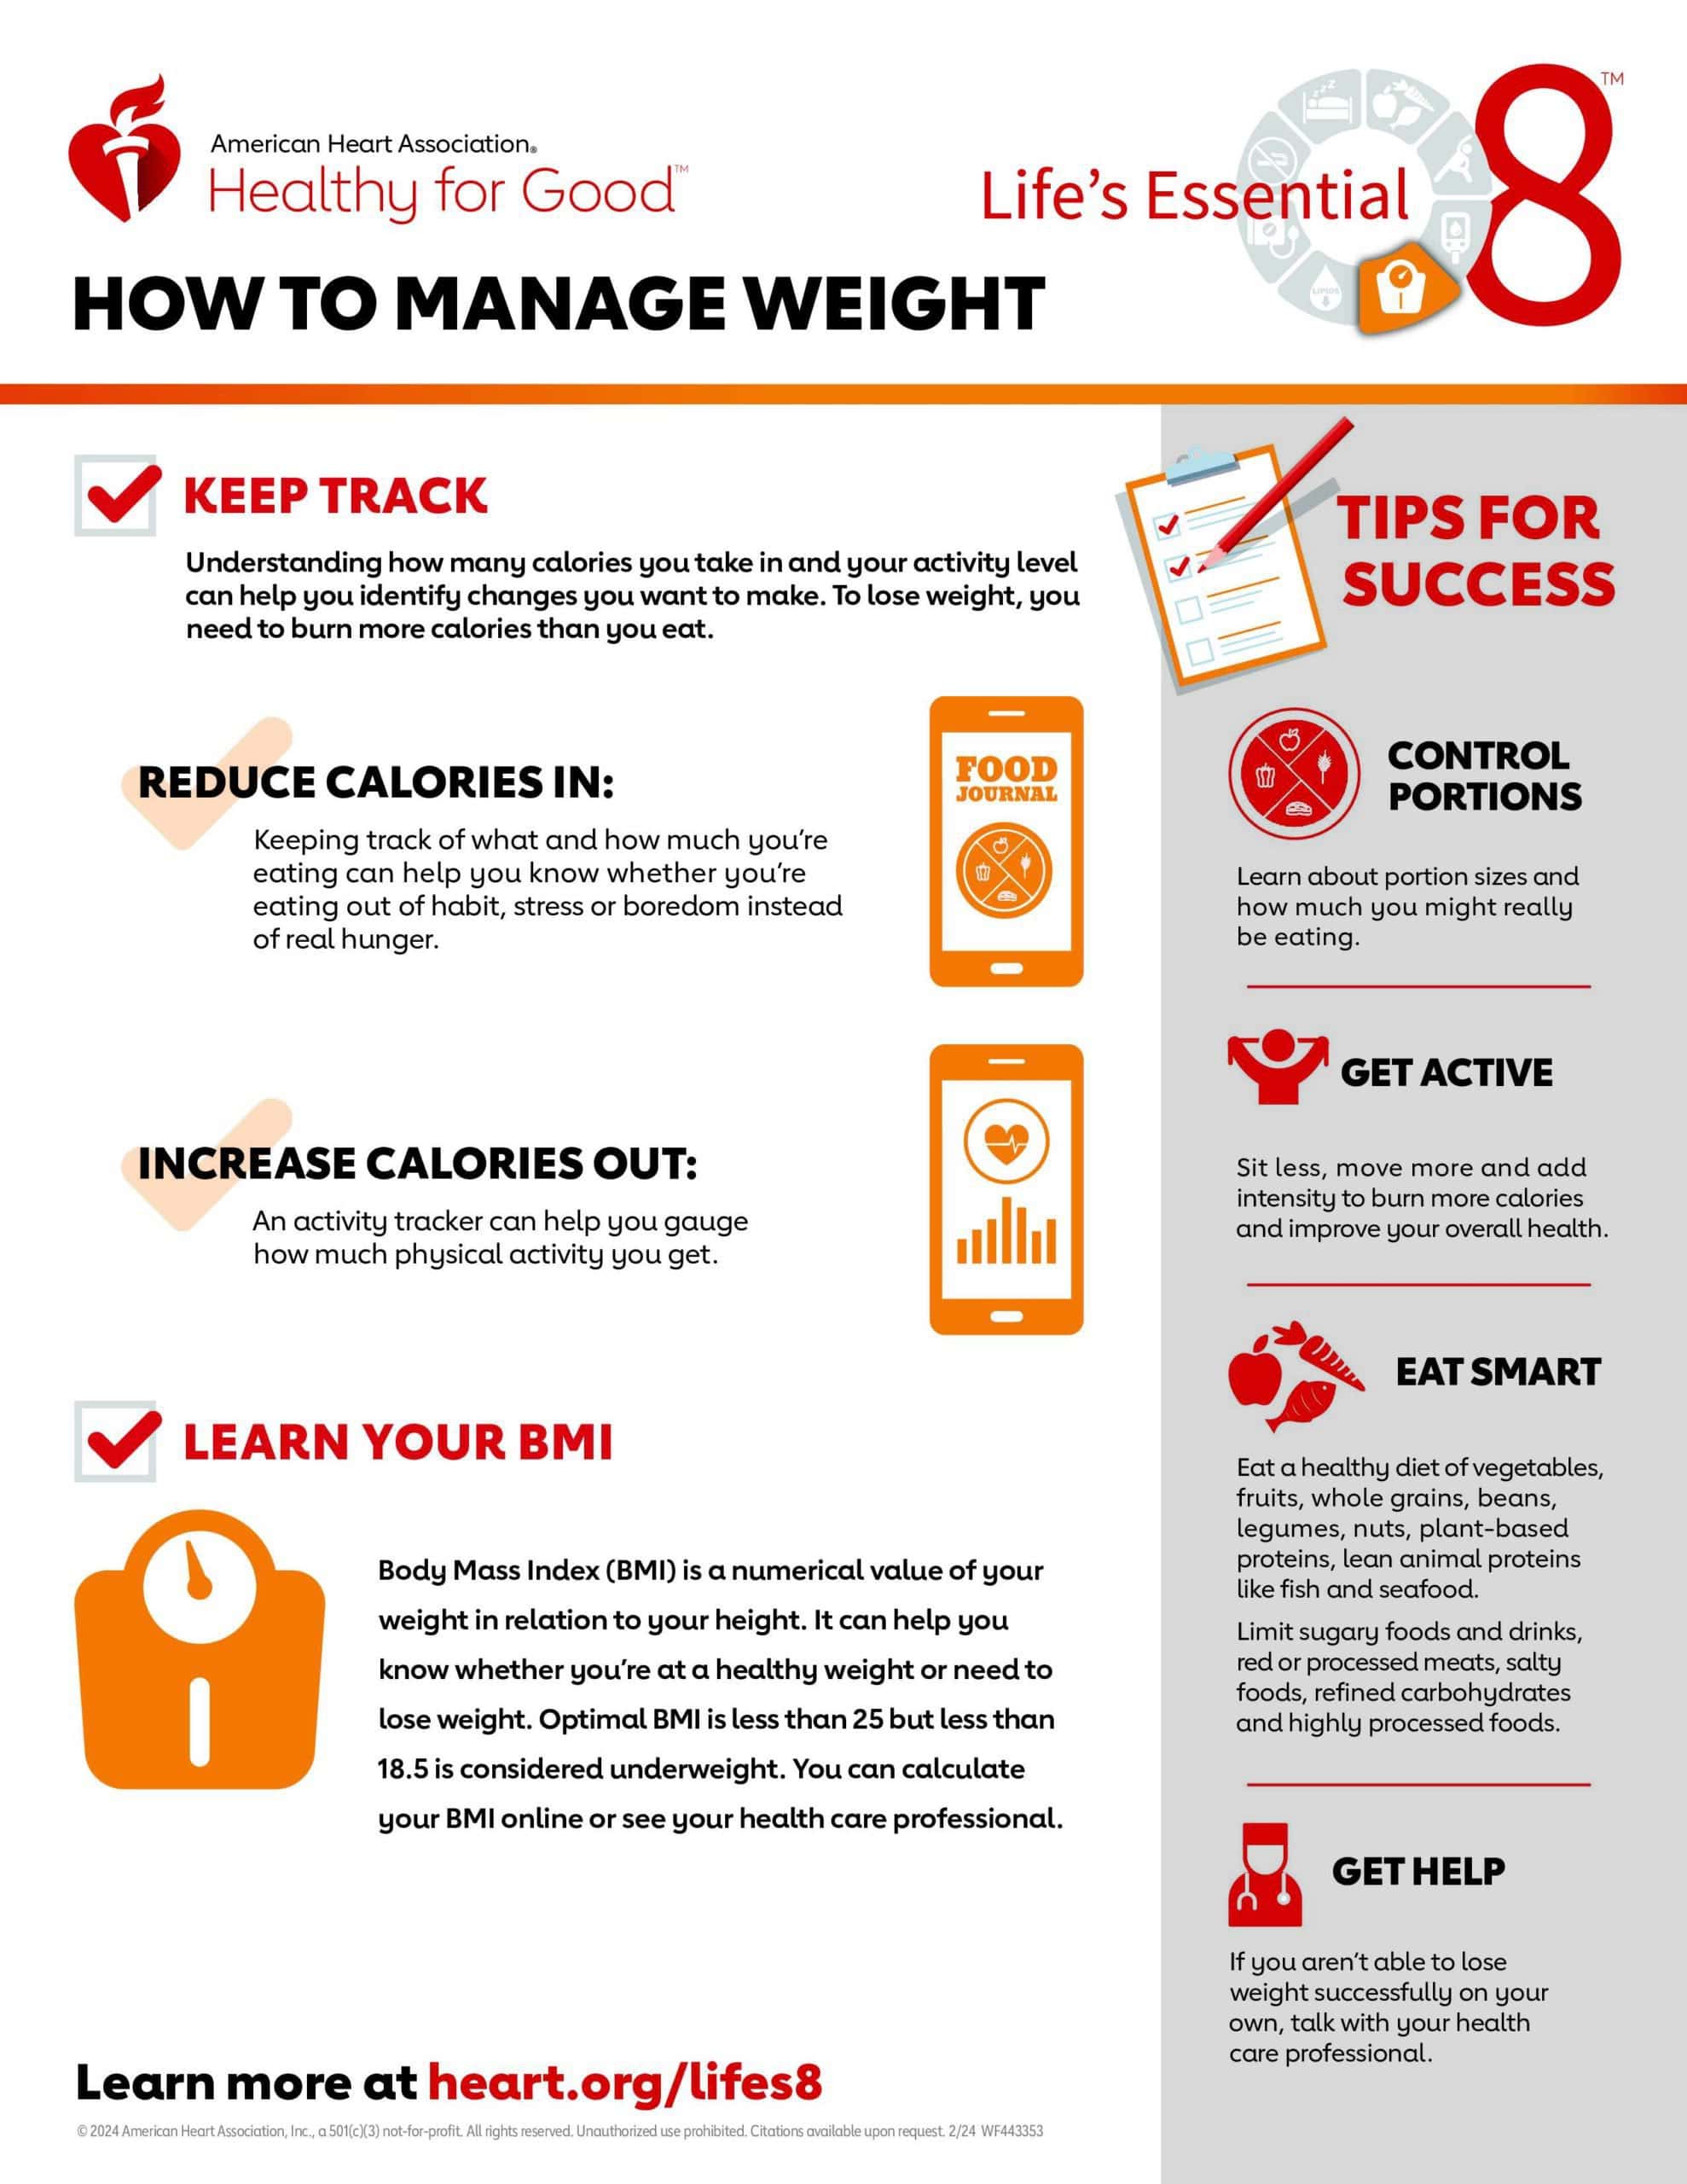 Manage weight - Dr. Axe